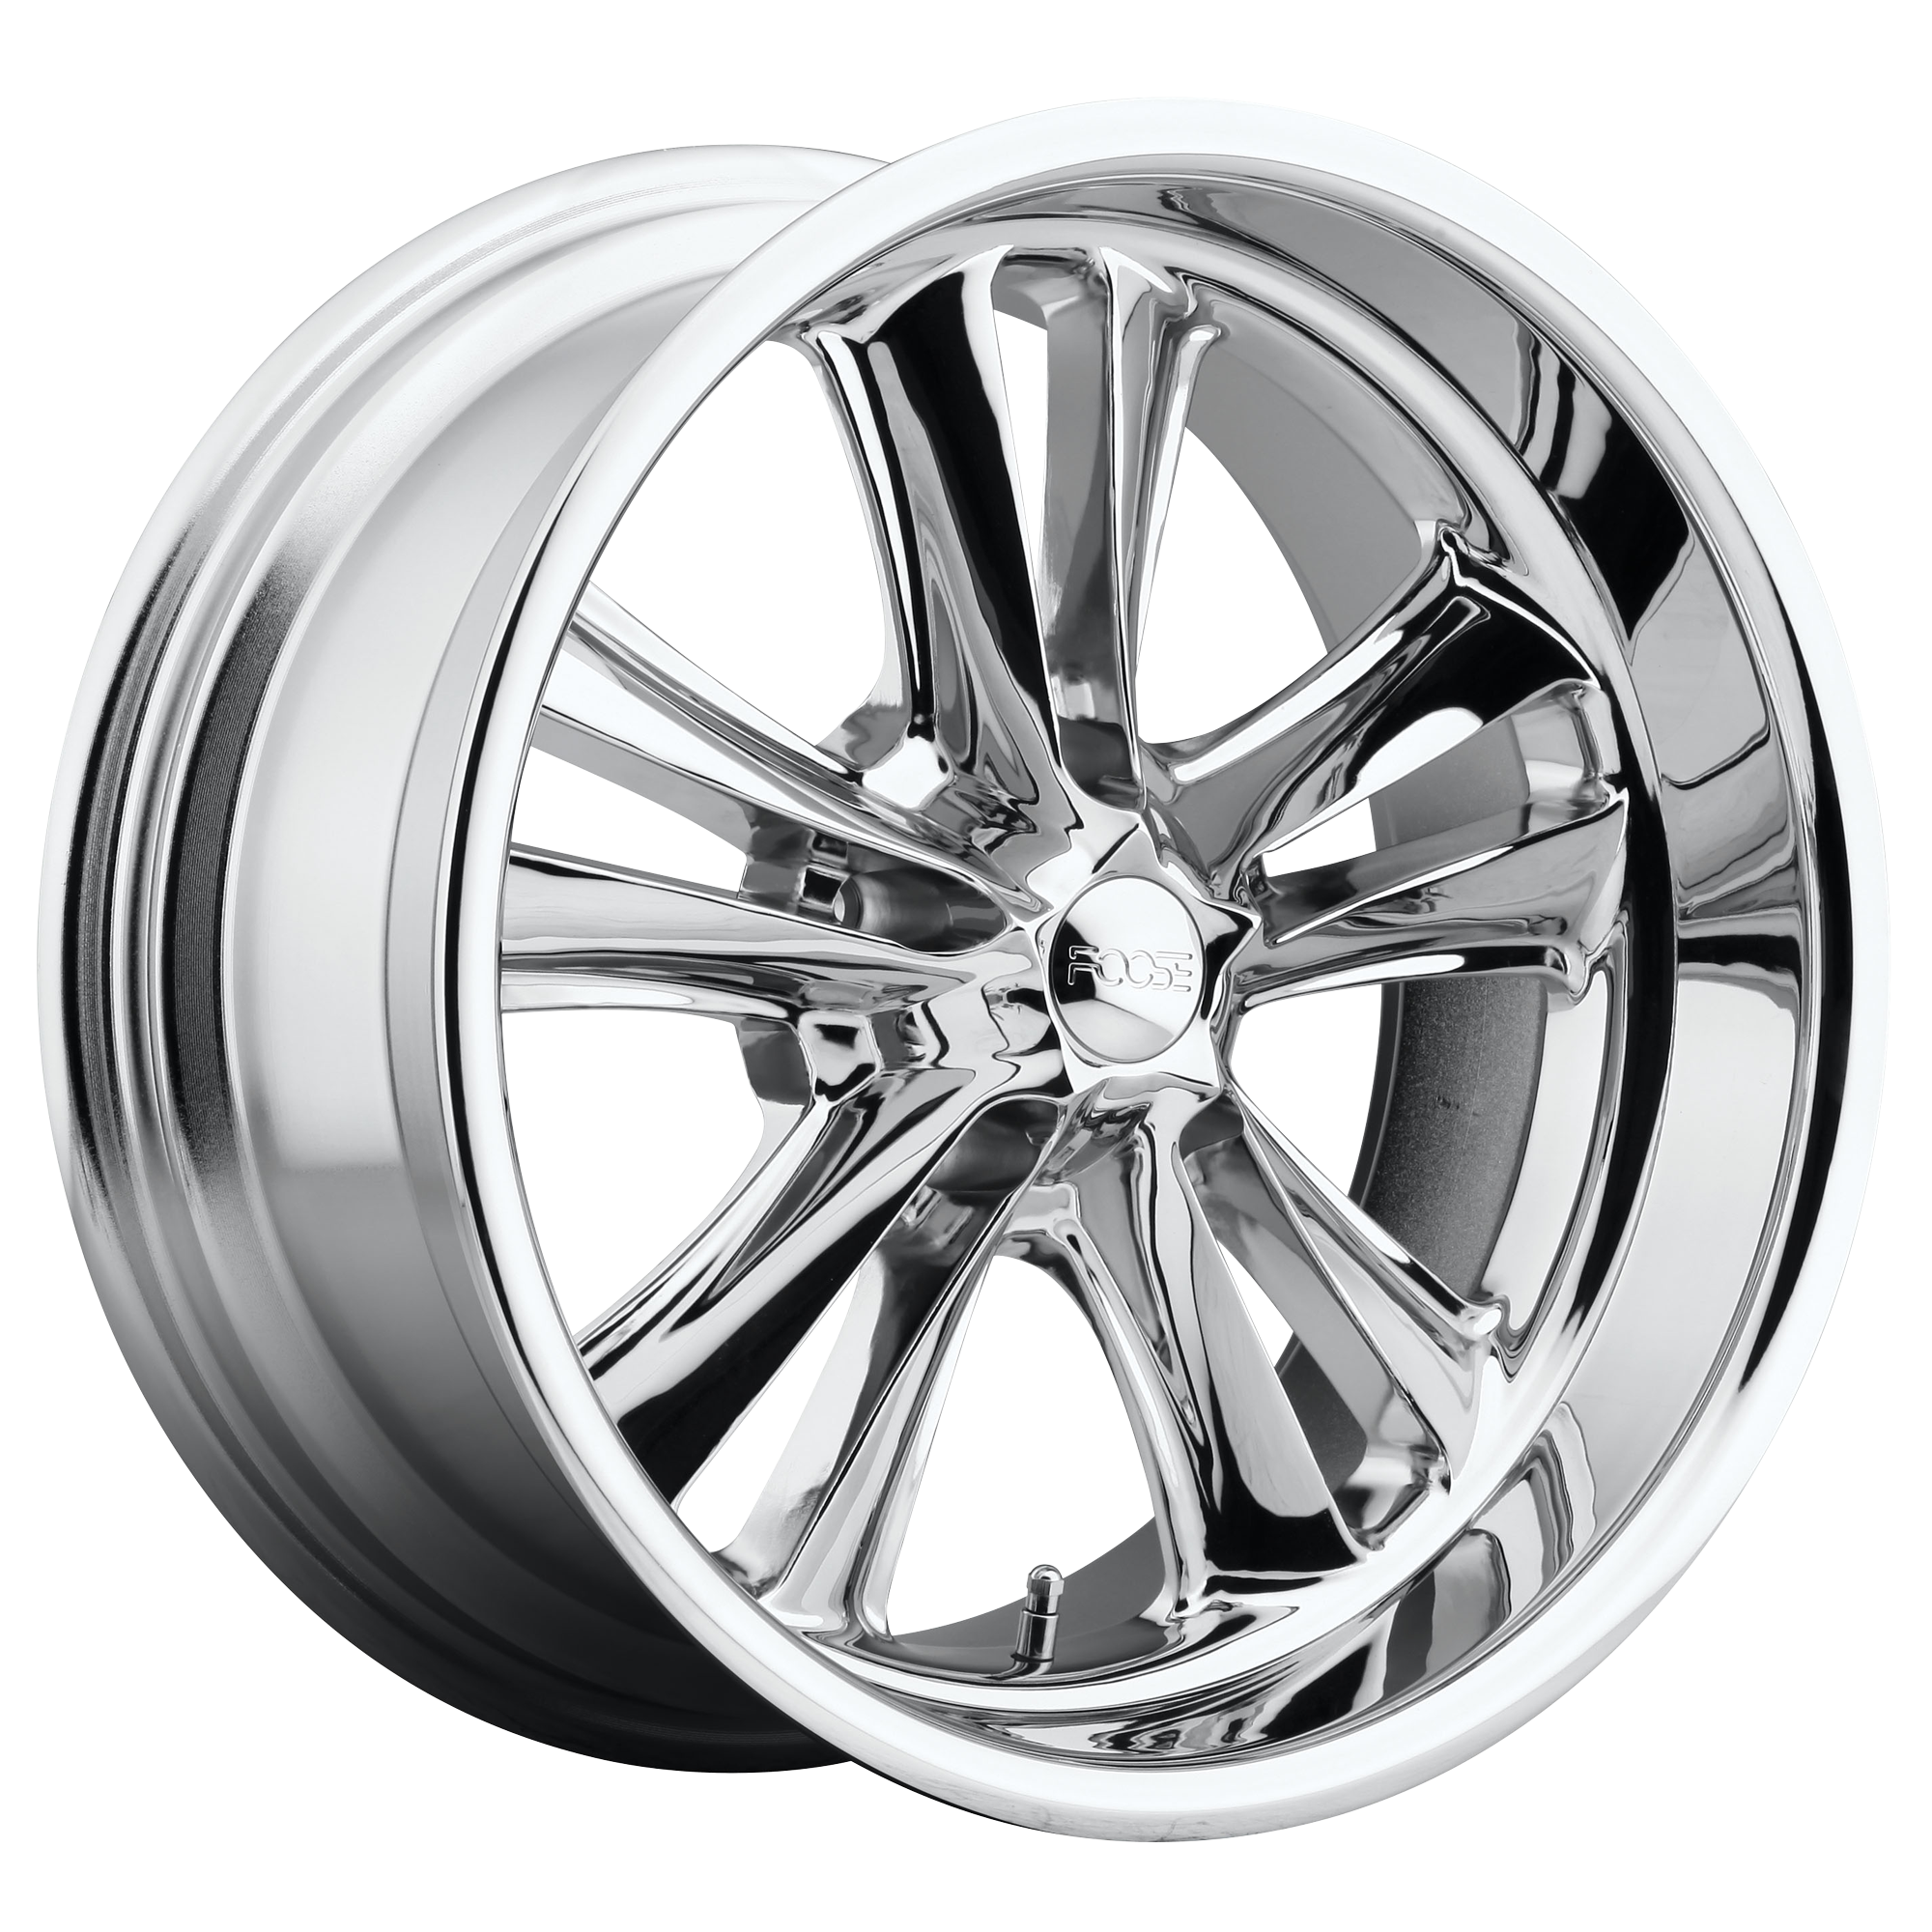 KNUCKLE 17x7 5x120.65 CHROME PLATED (1 mm) - Tires and Engine Performance